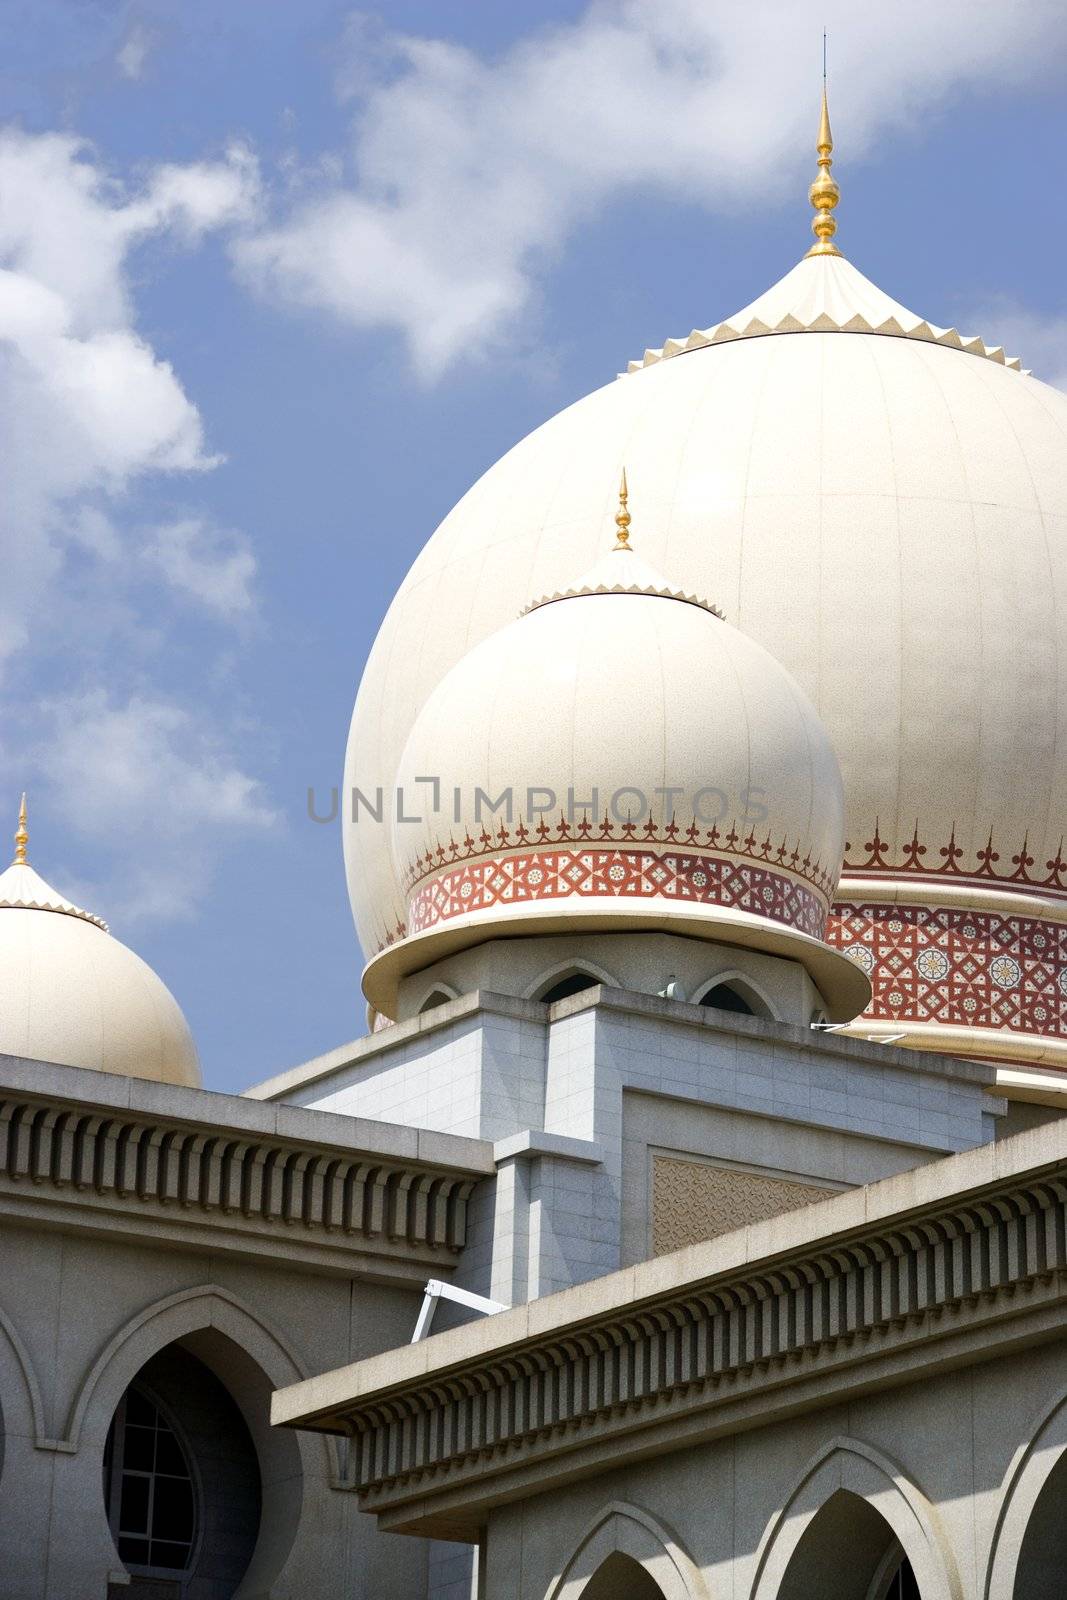 Image of a domes on a bulding incorporating Islamic architecture.